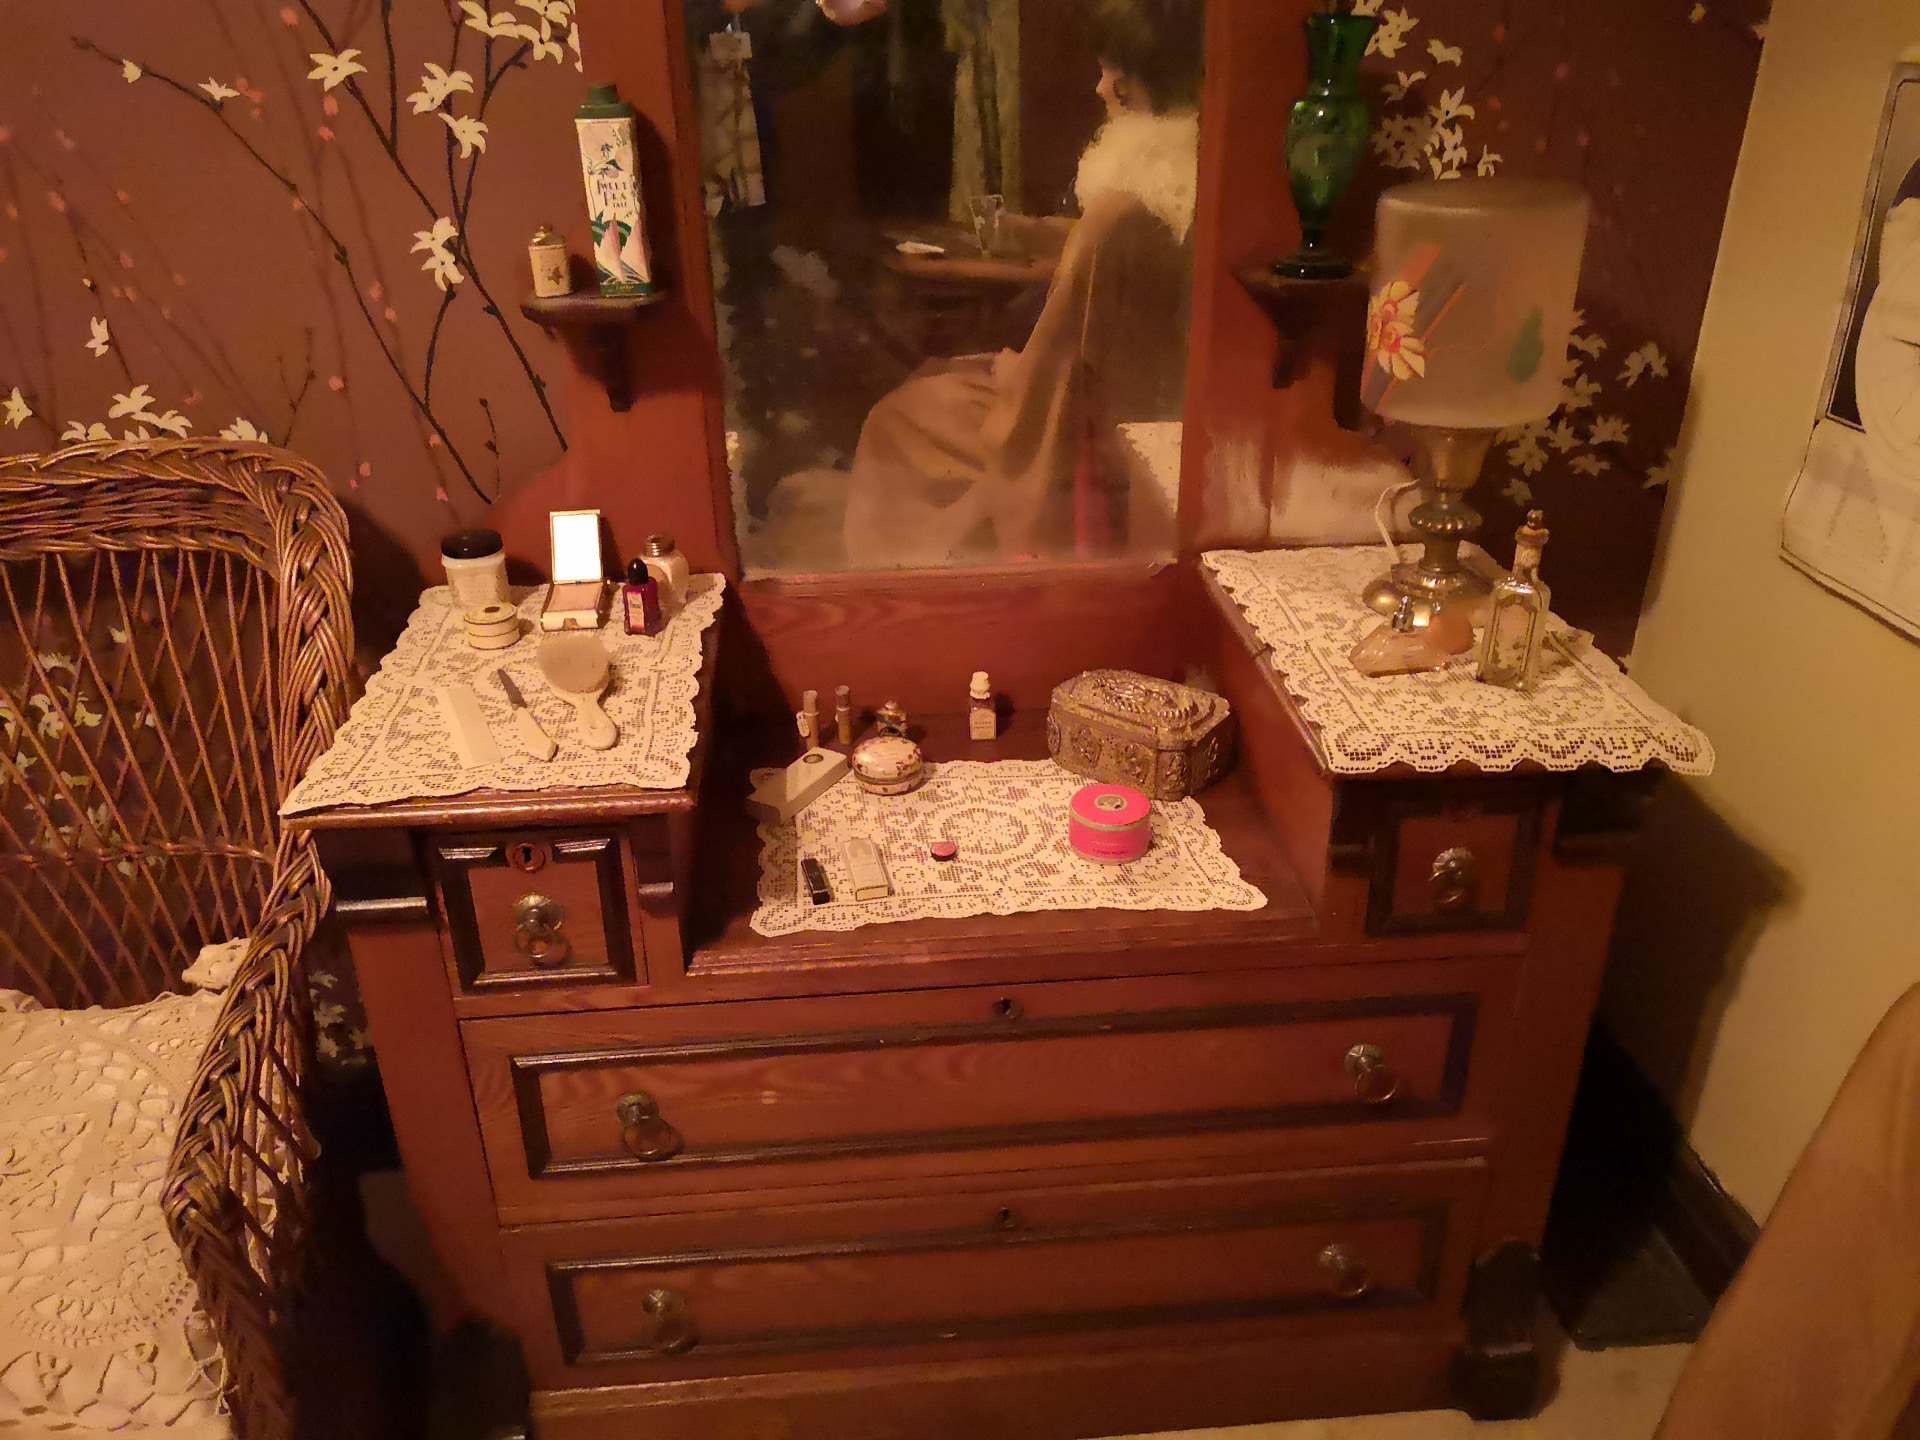 A wood dressing table with three levels. Each has a doily on it and various personal items including make up, a brush, perfume, and a jewelry box.